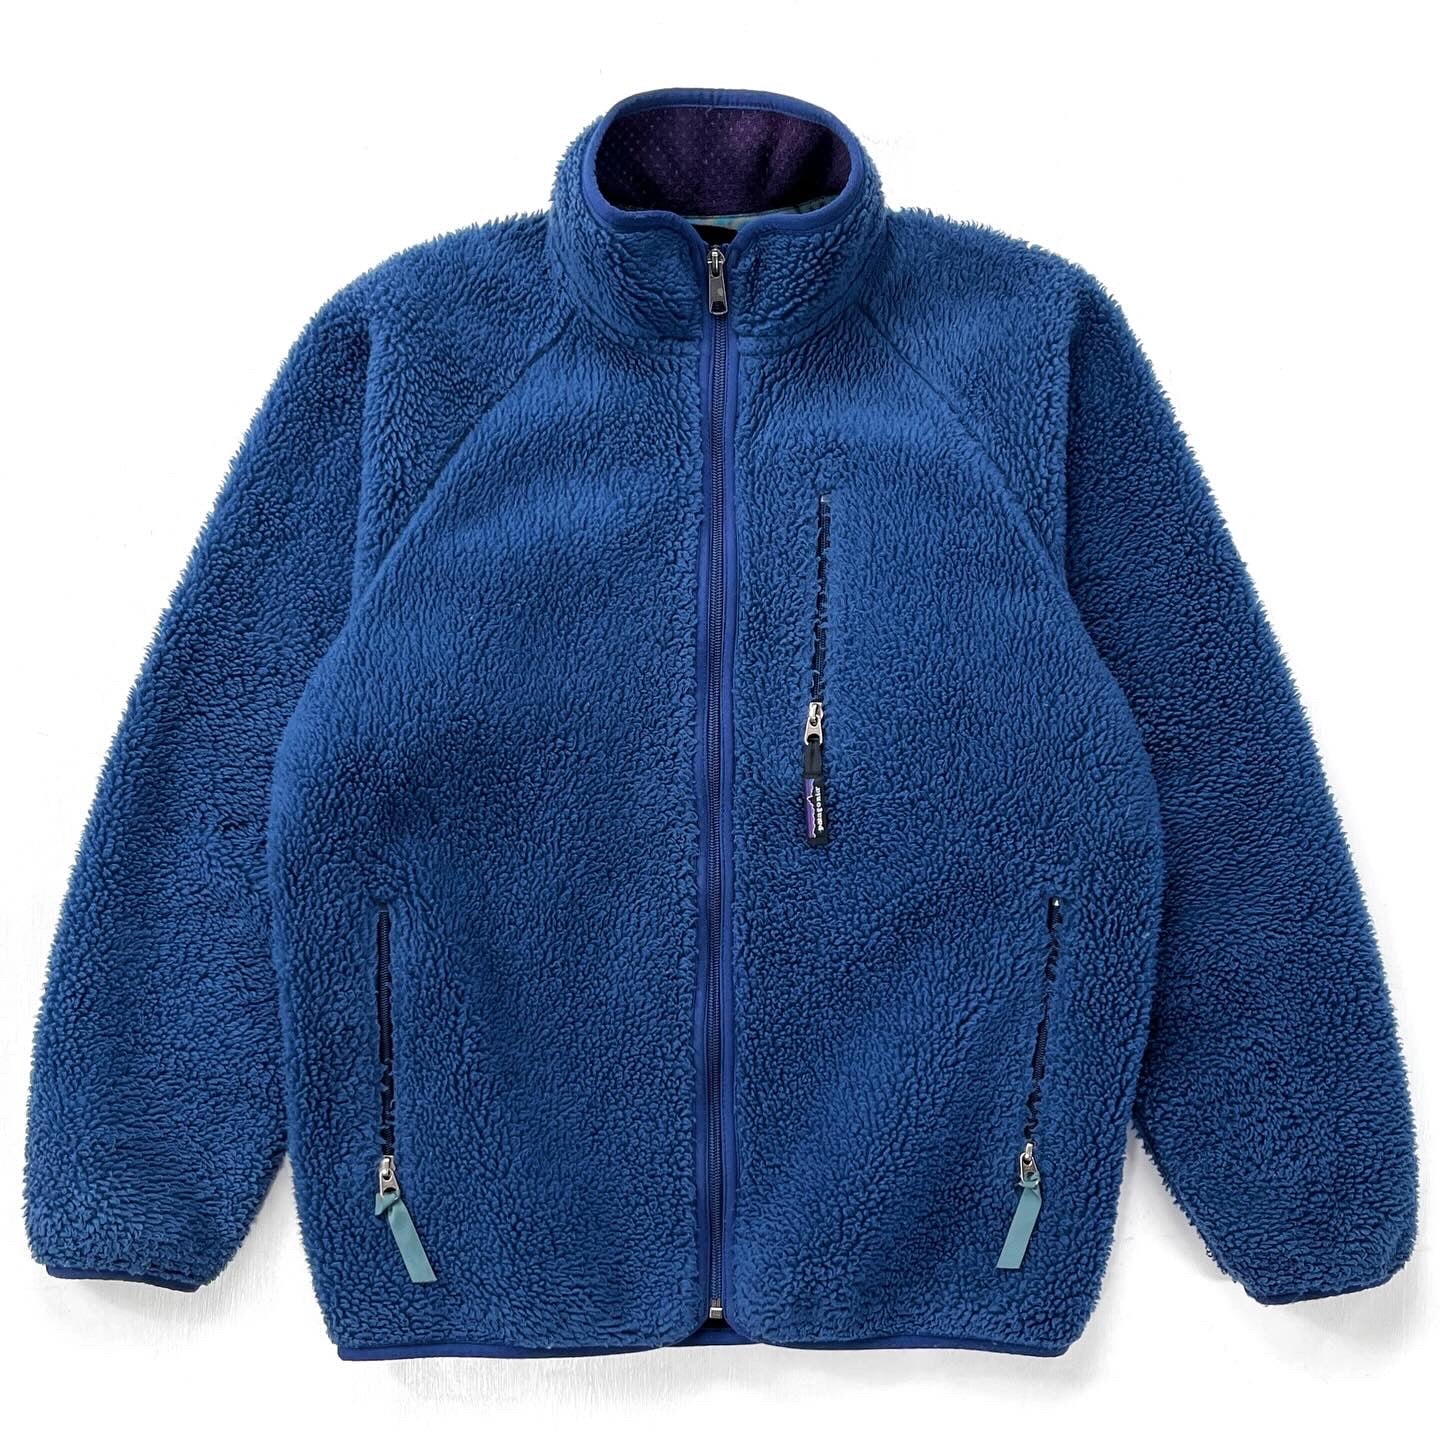 1996 Patagonia Made In The U.S.A. Retro Pile Cardigan, Blueberry (M)